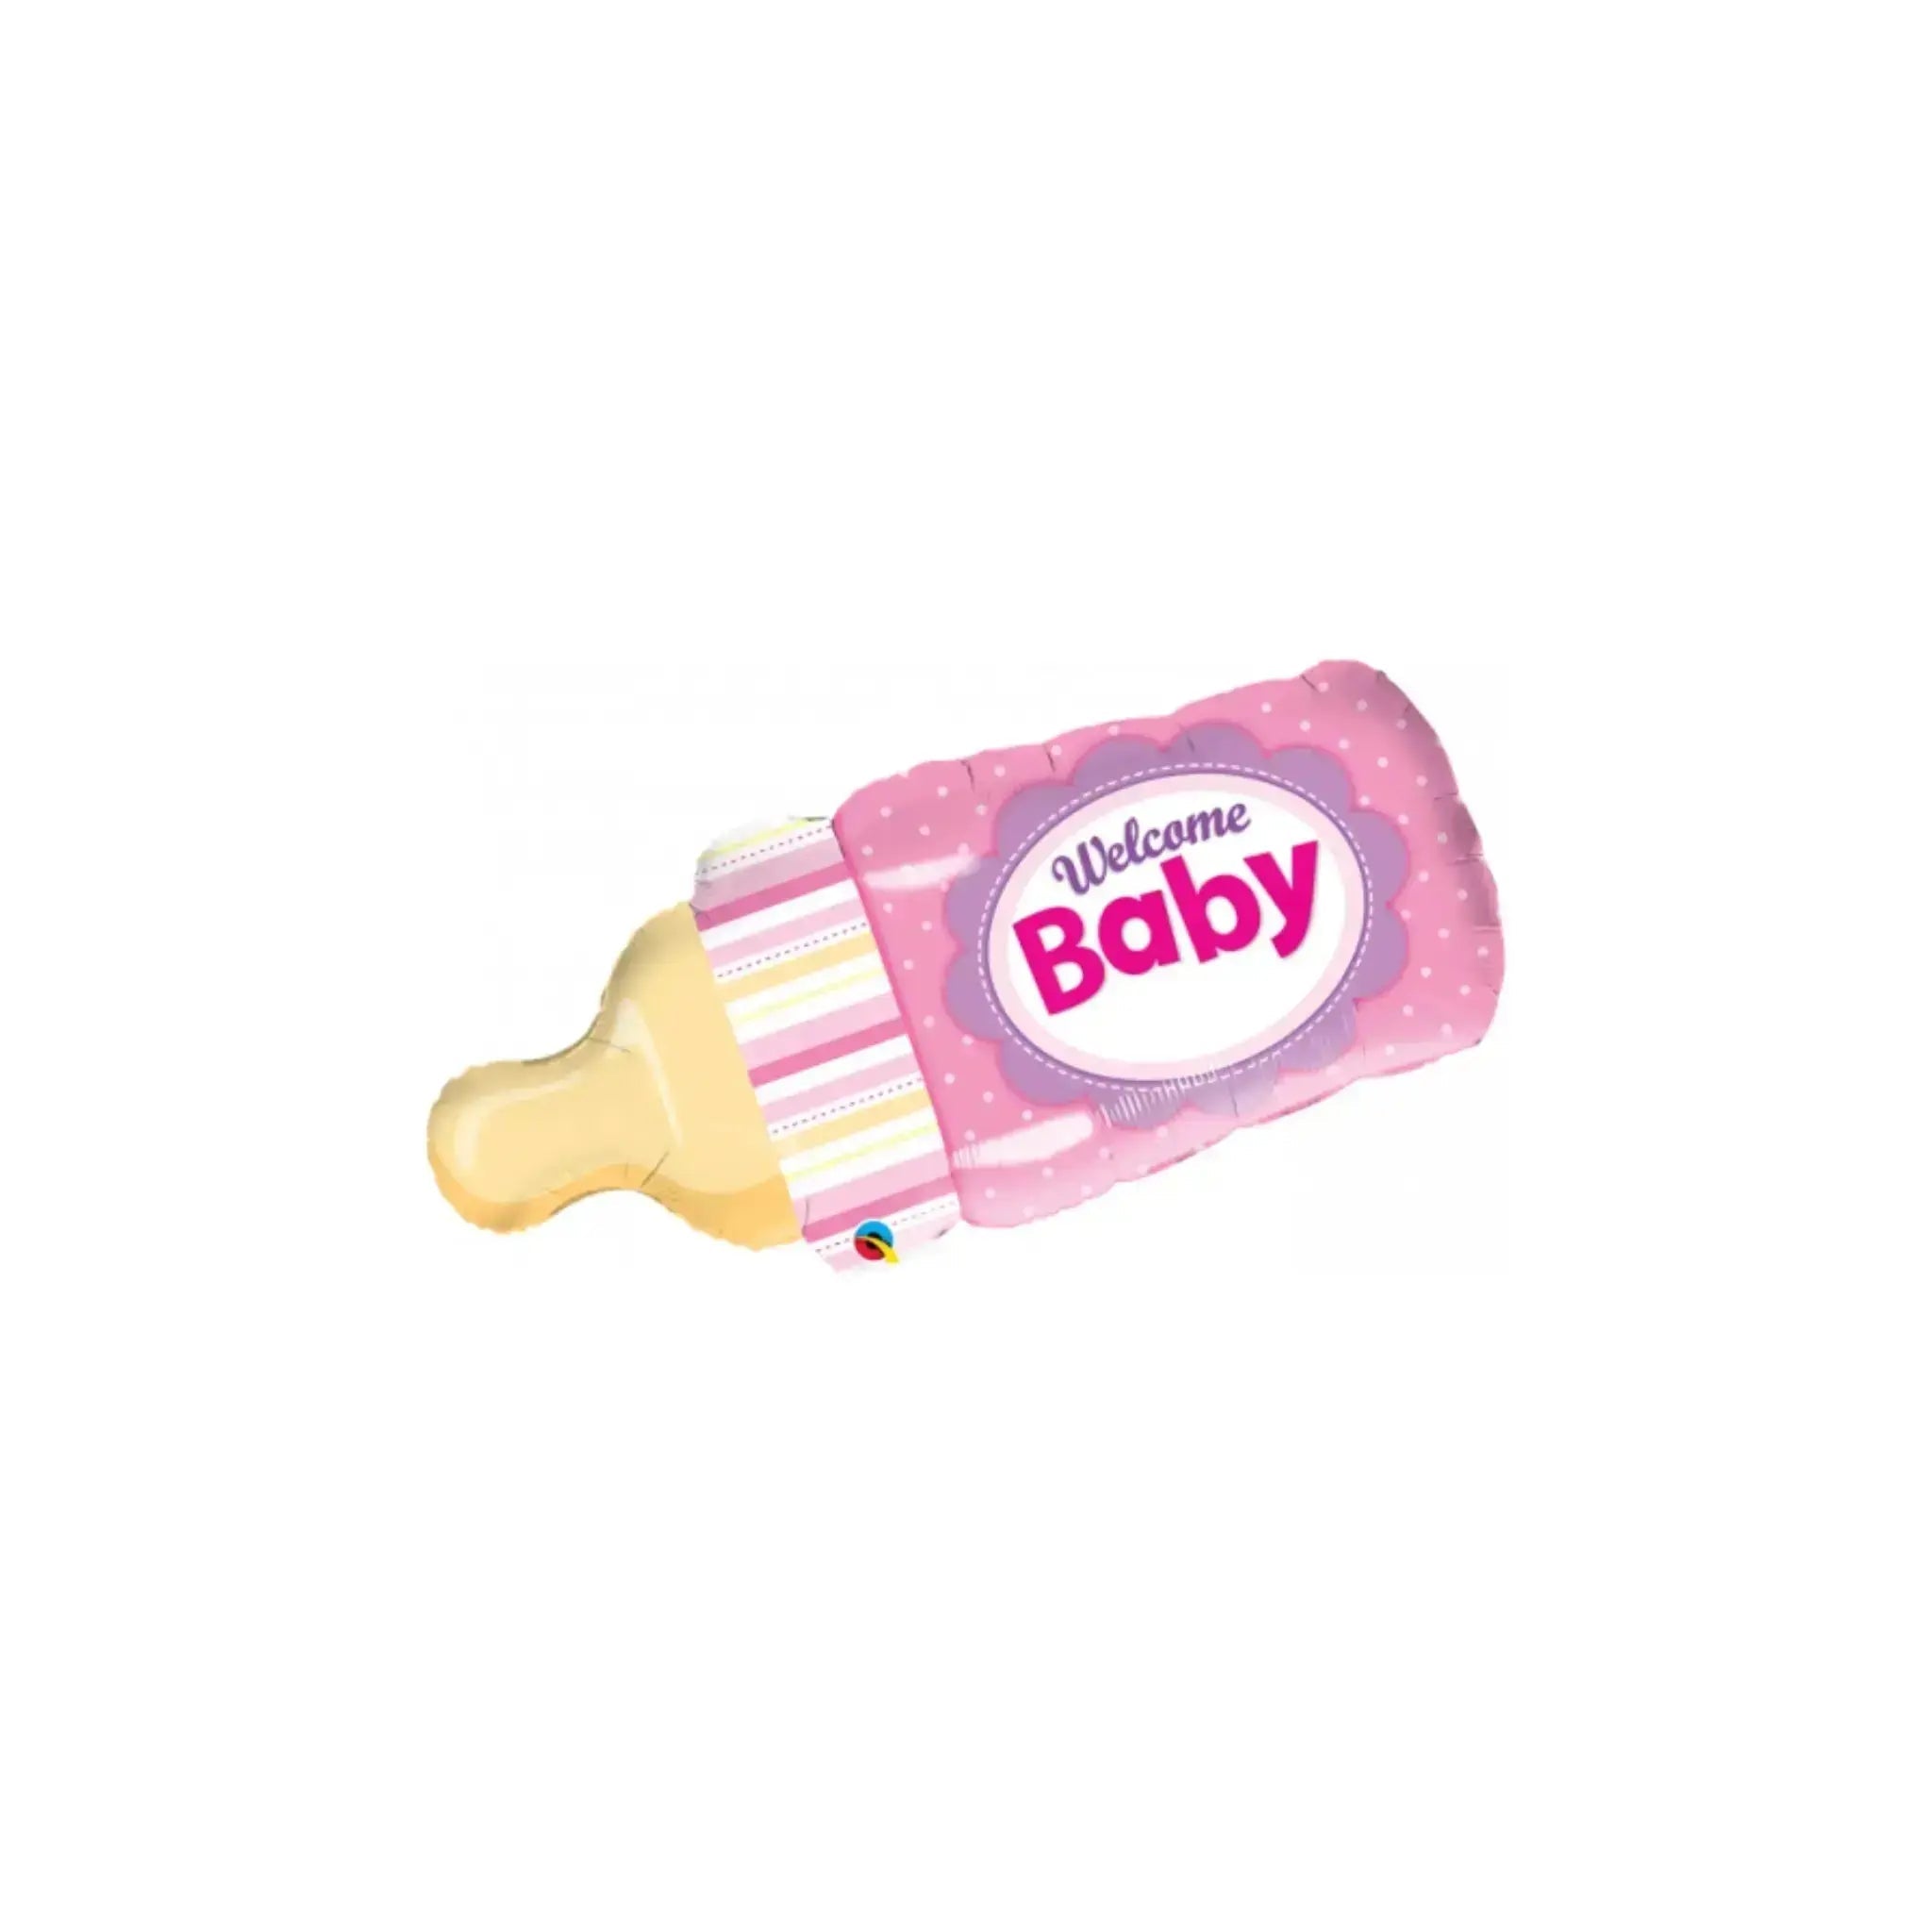 Welcome Baby, Pink Bottle Balloon | The Party Hut